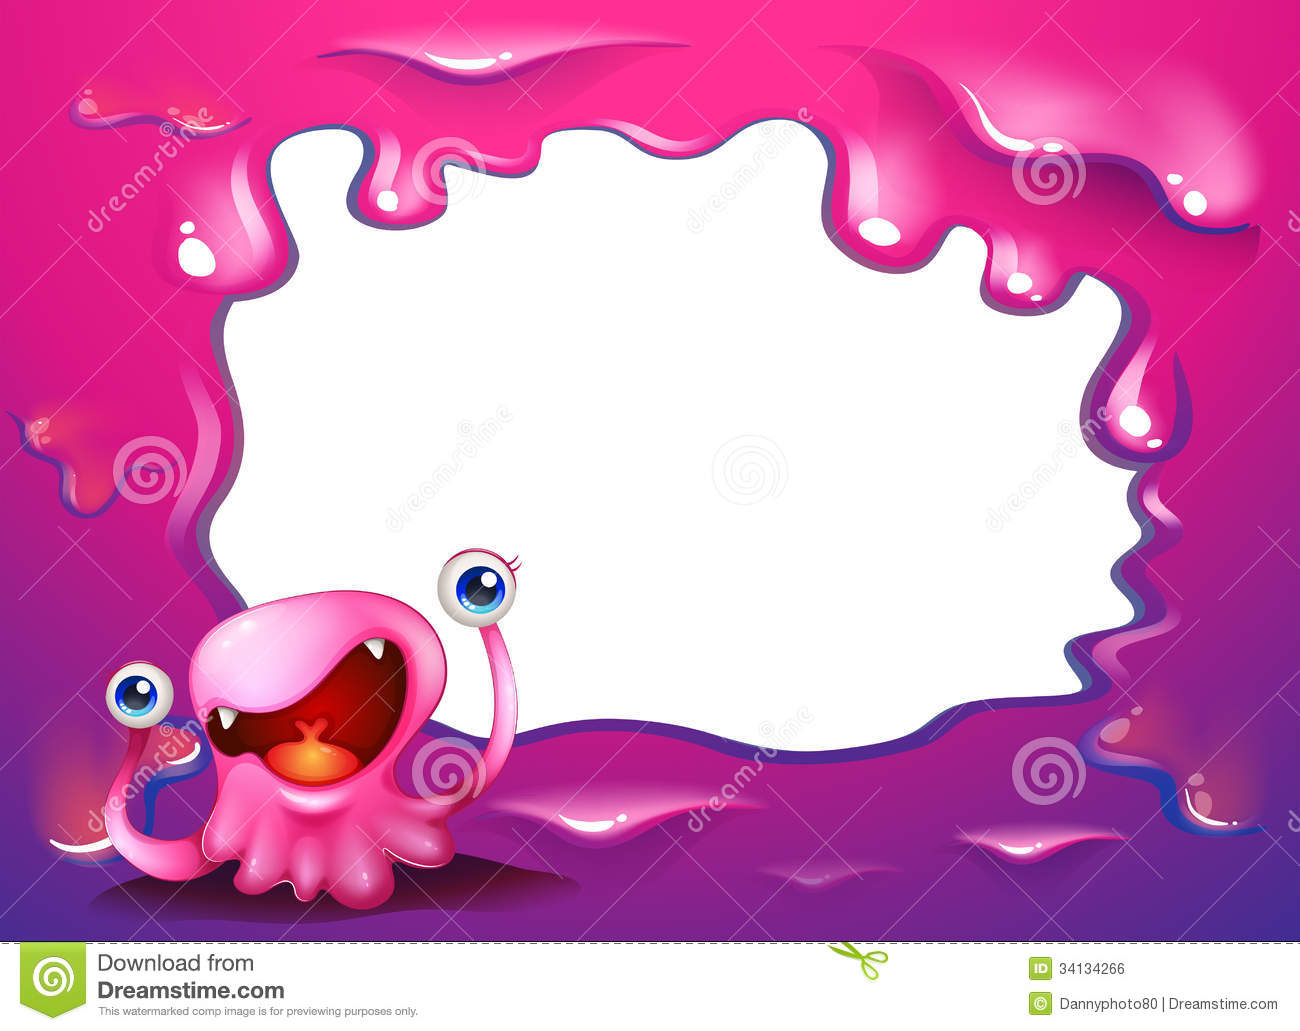 Royalty Free Stock Image  A Pink Border Design With A Monster